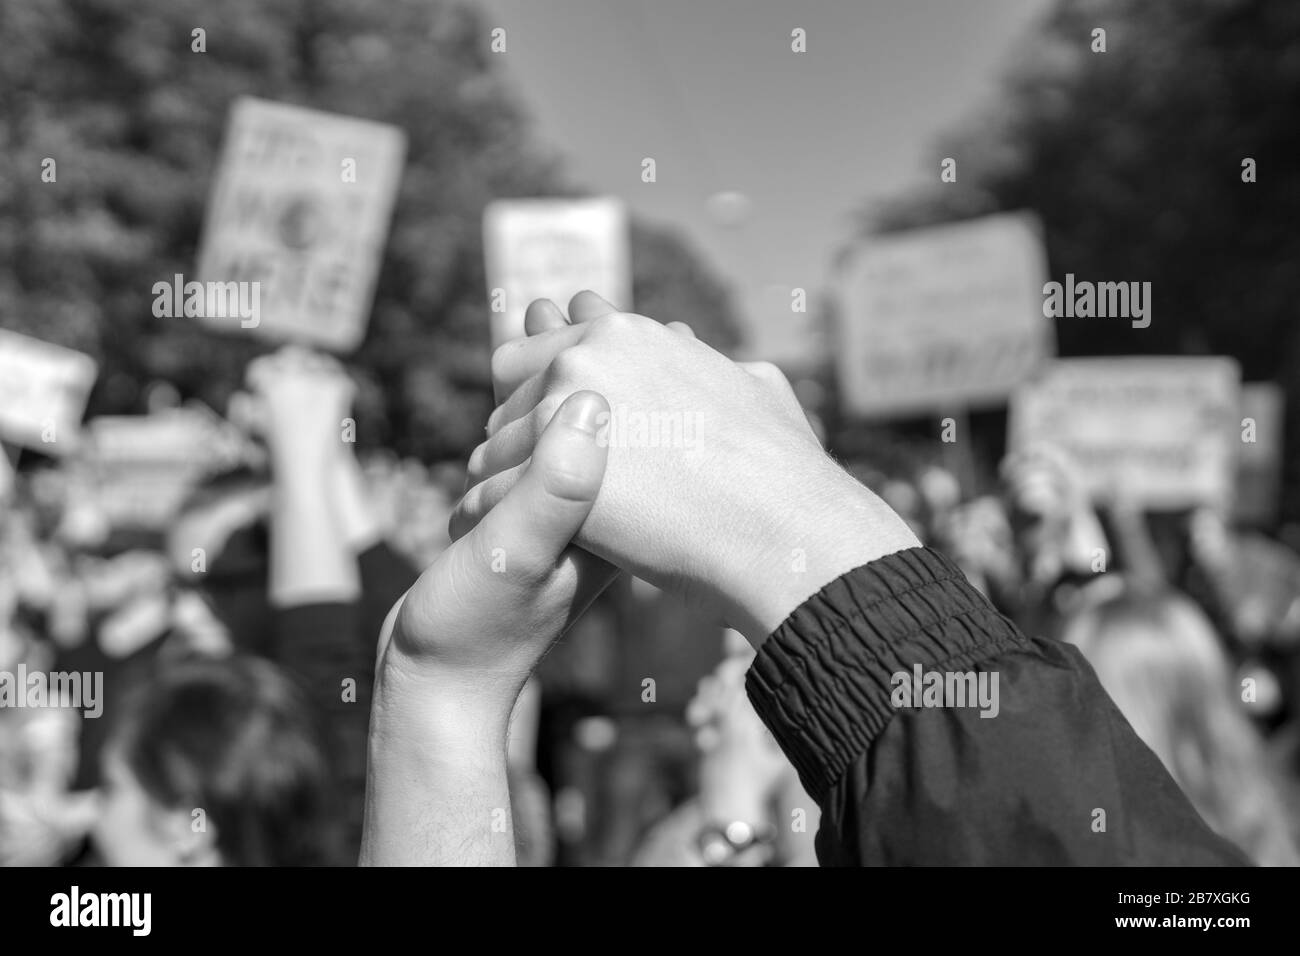 photograph in black and white of two people joining hands together at a fridays for future protest regarding climate change, symbolizing strength Stock Photo